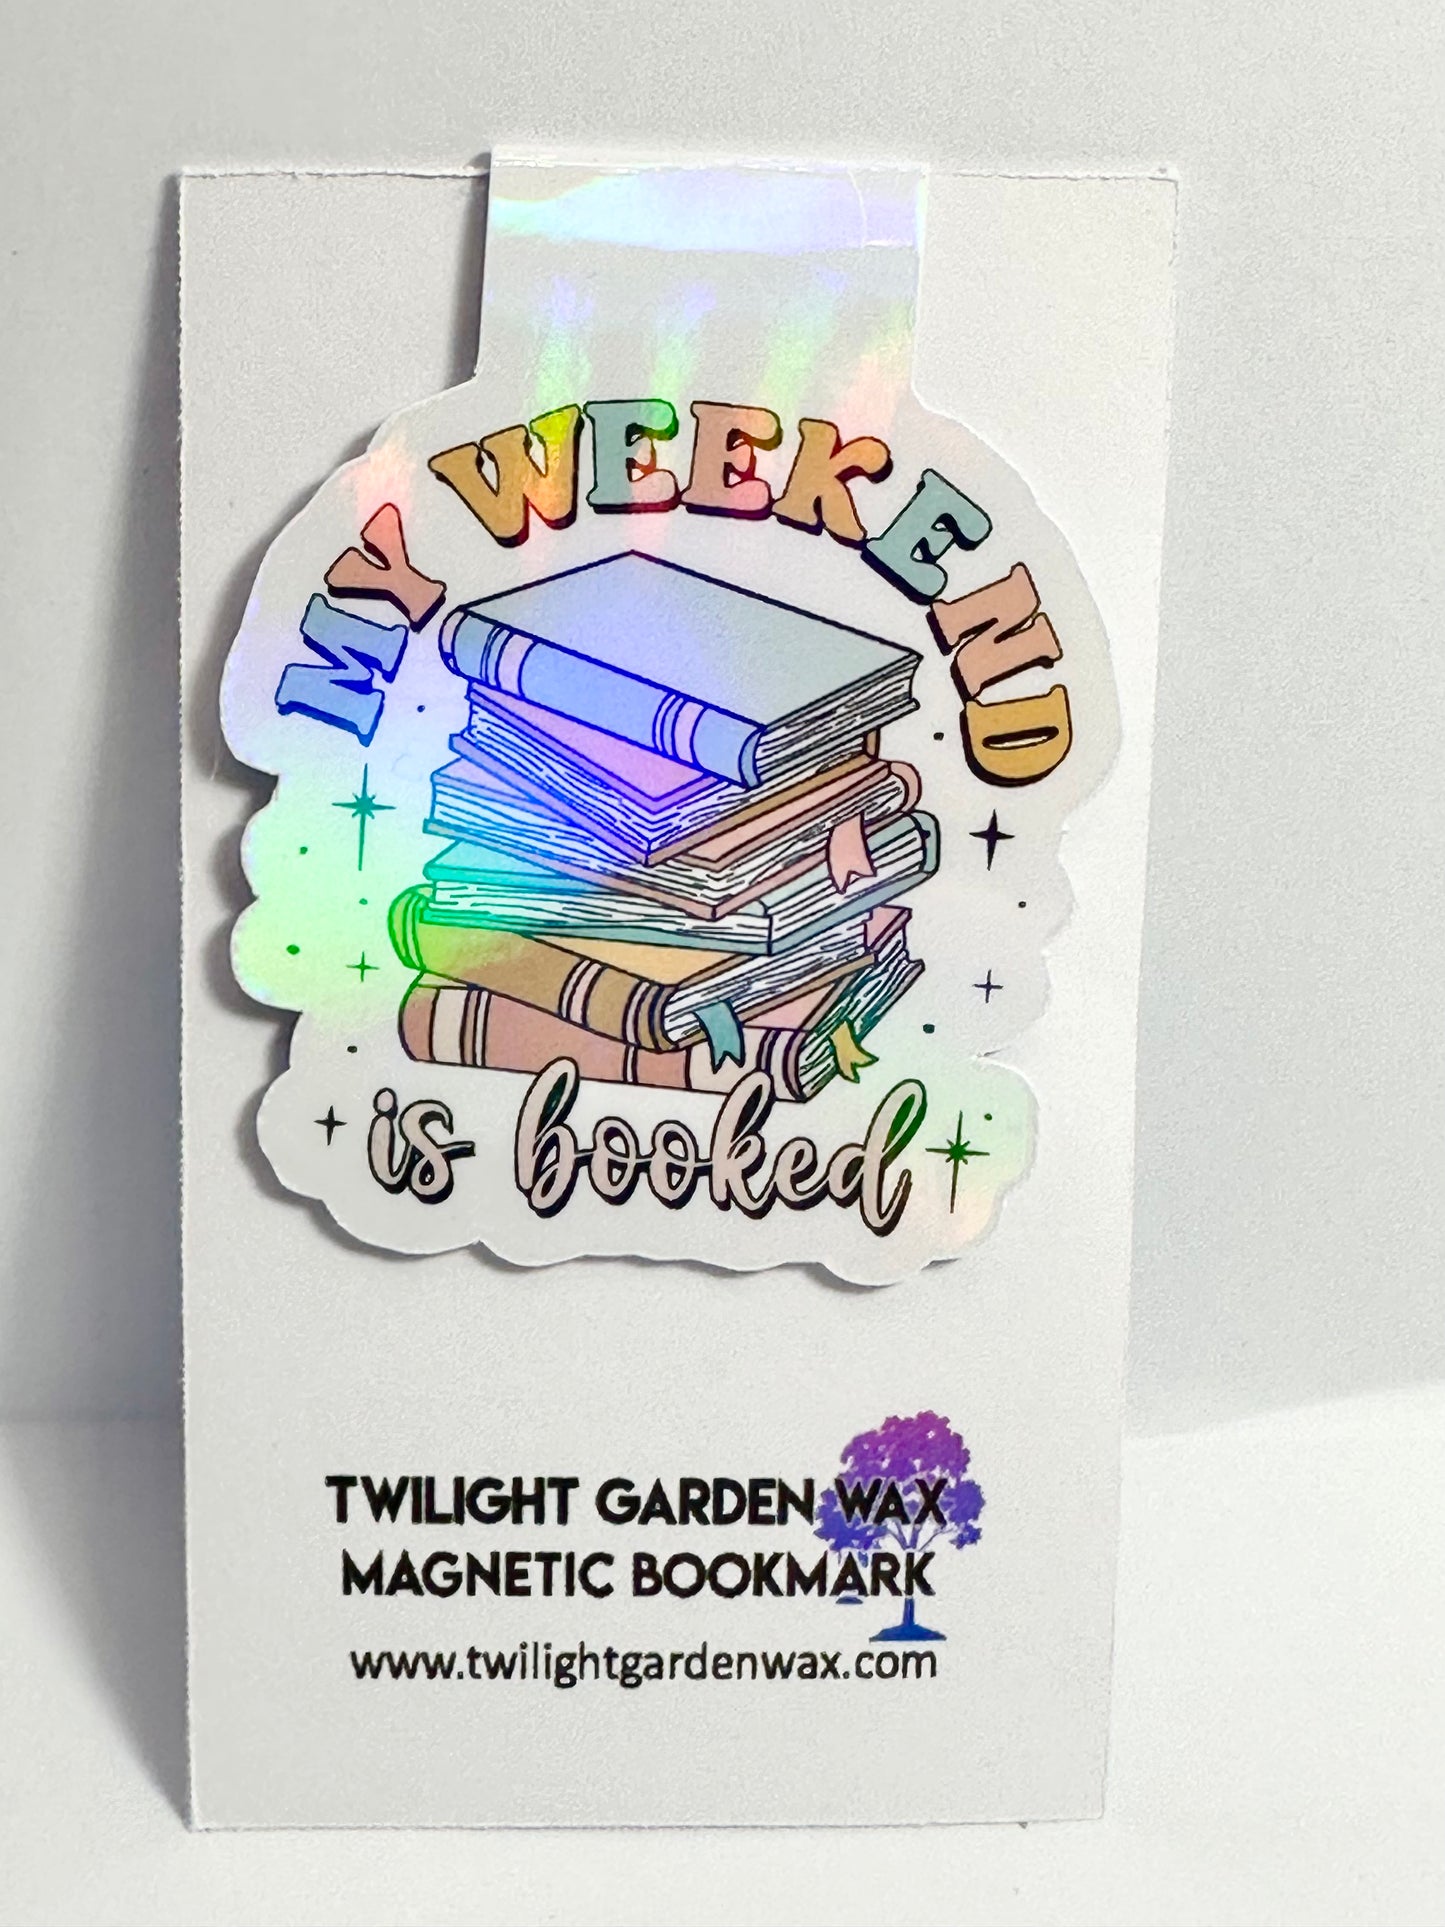 My Weekend is Booked Magnetic Bookmark